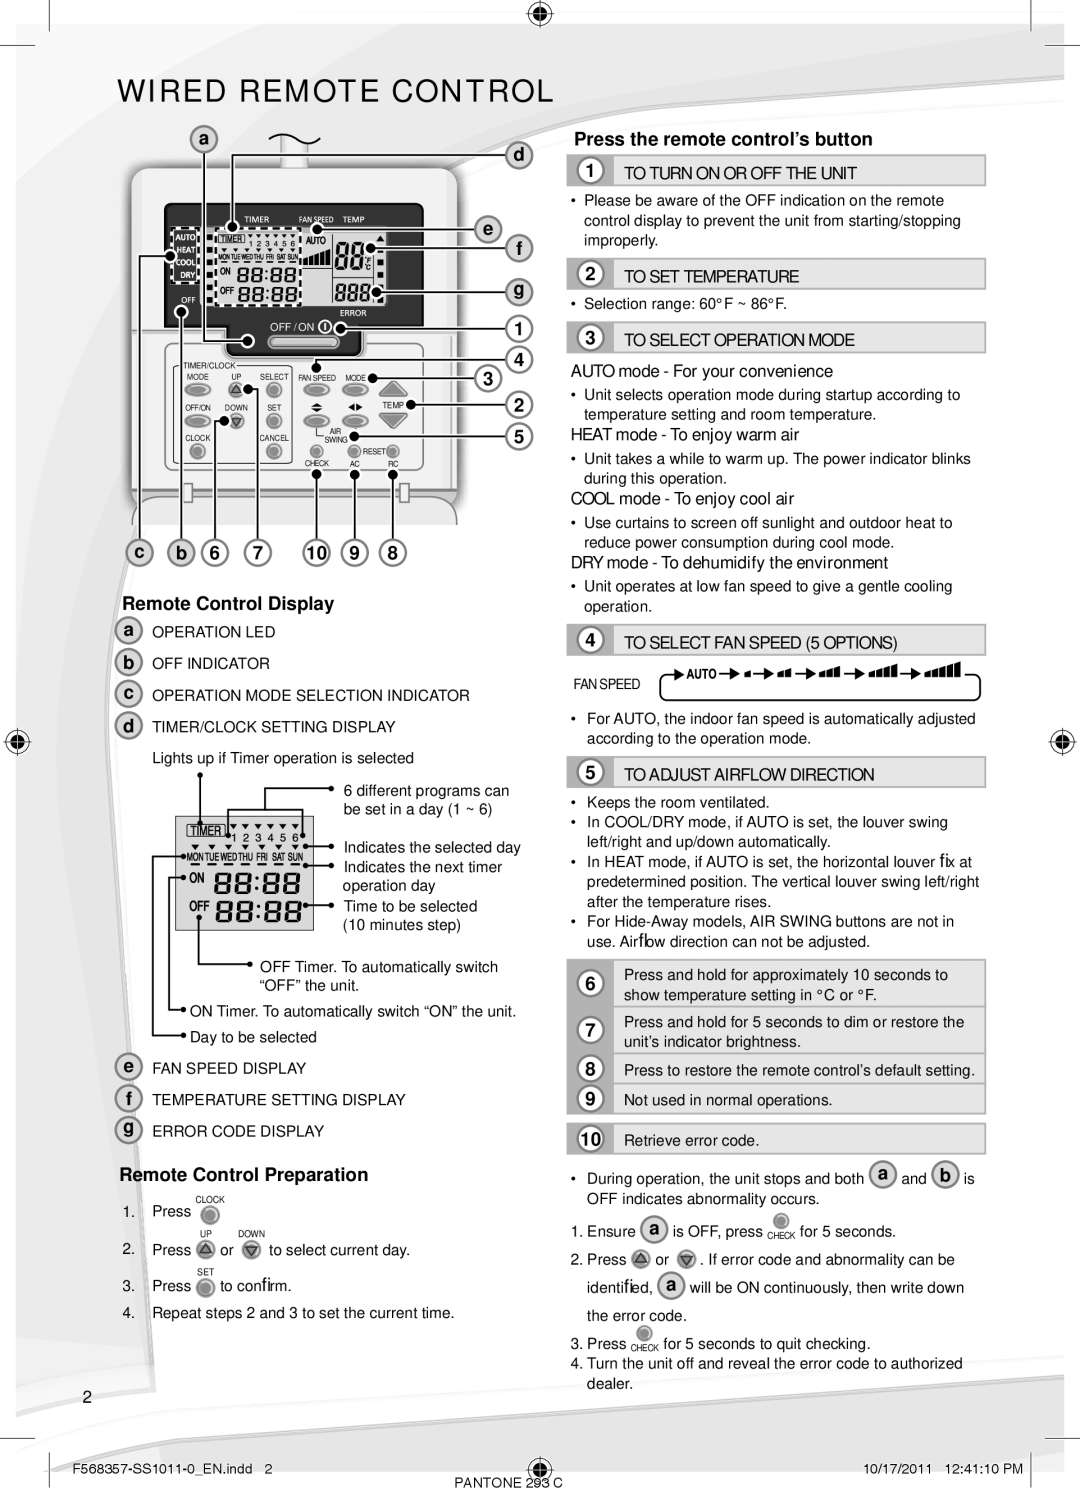 Panasonic cz-rd516c user manual Wired Remote Control 